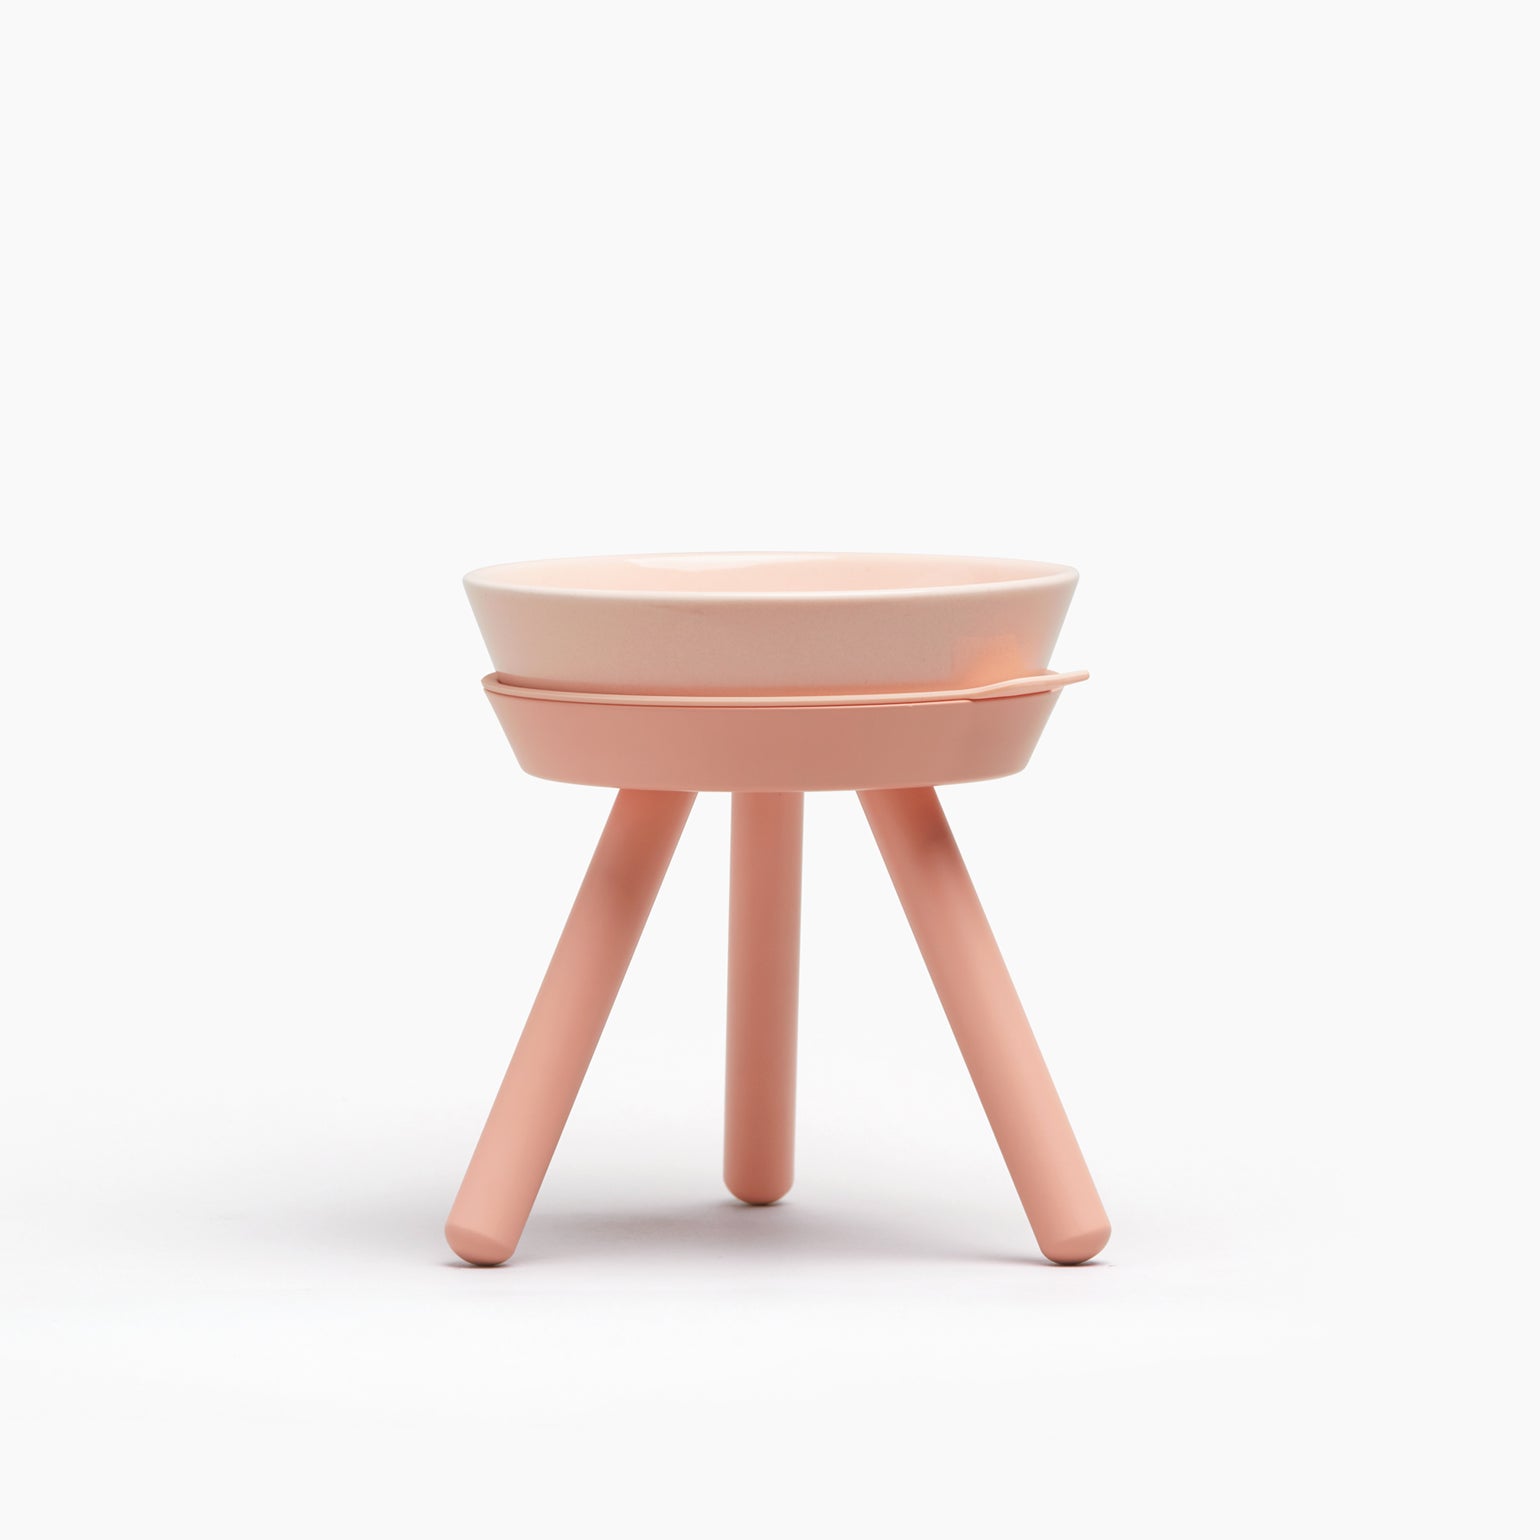 INHERENT - Oreo Table Pink, Tall Small